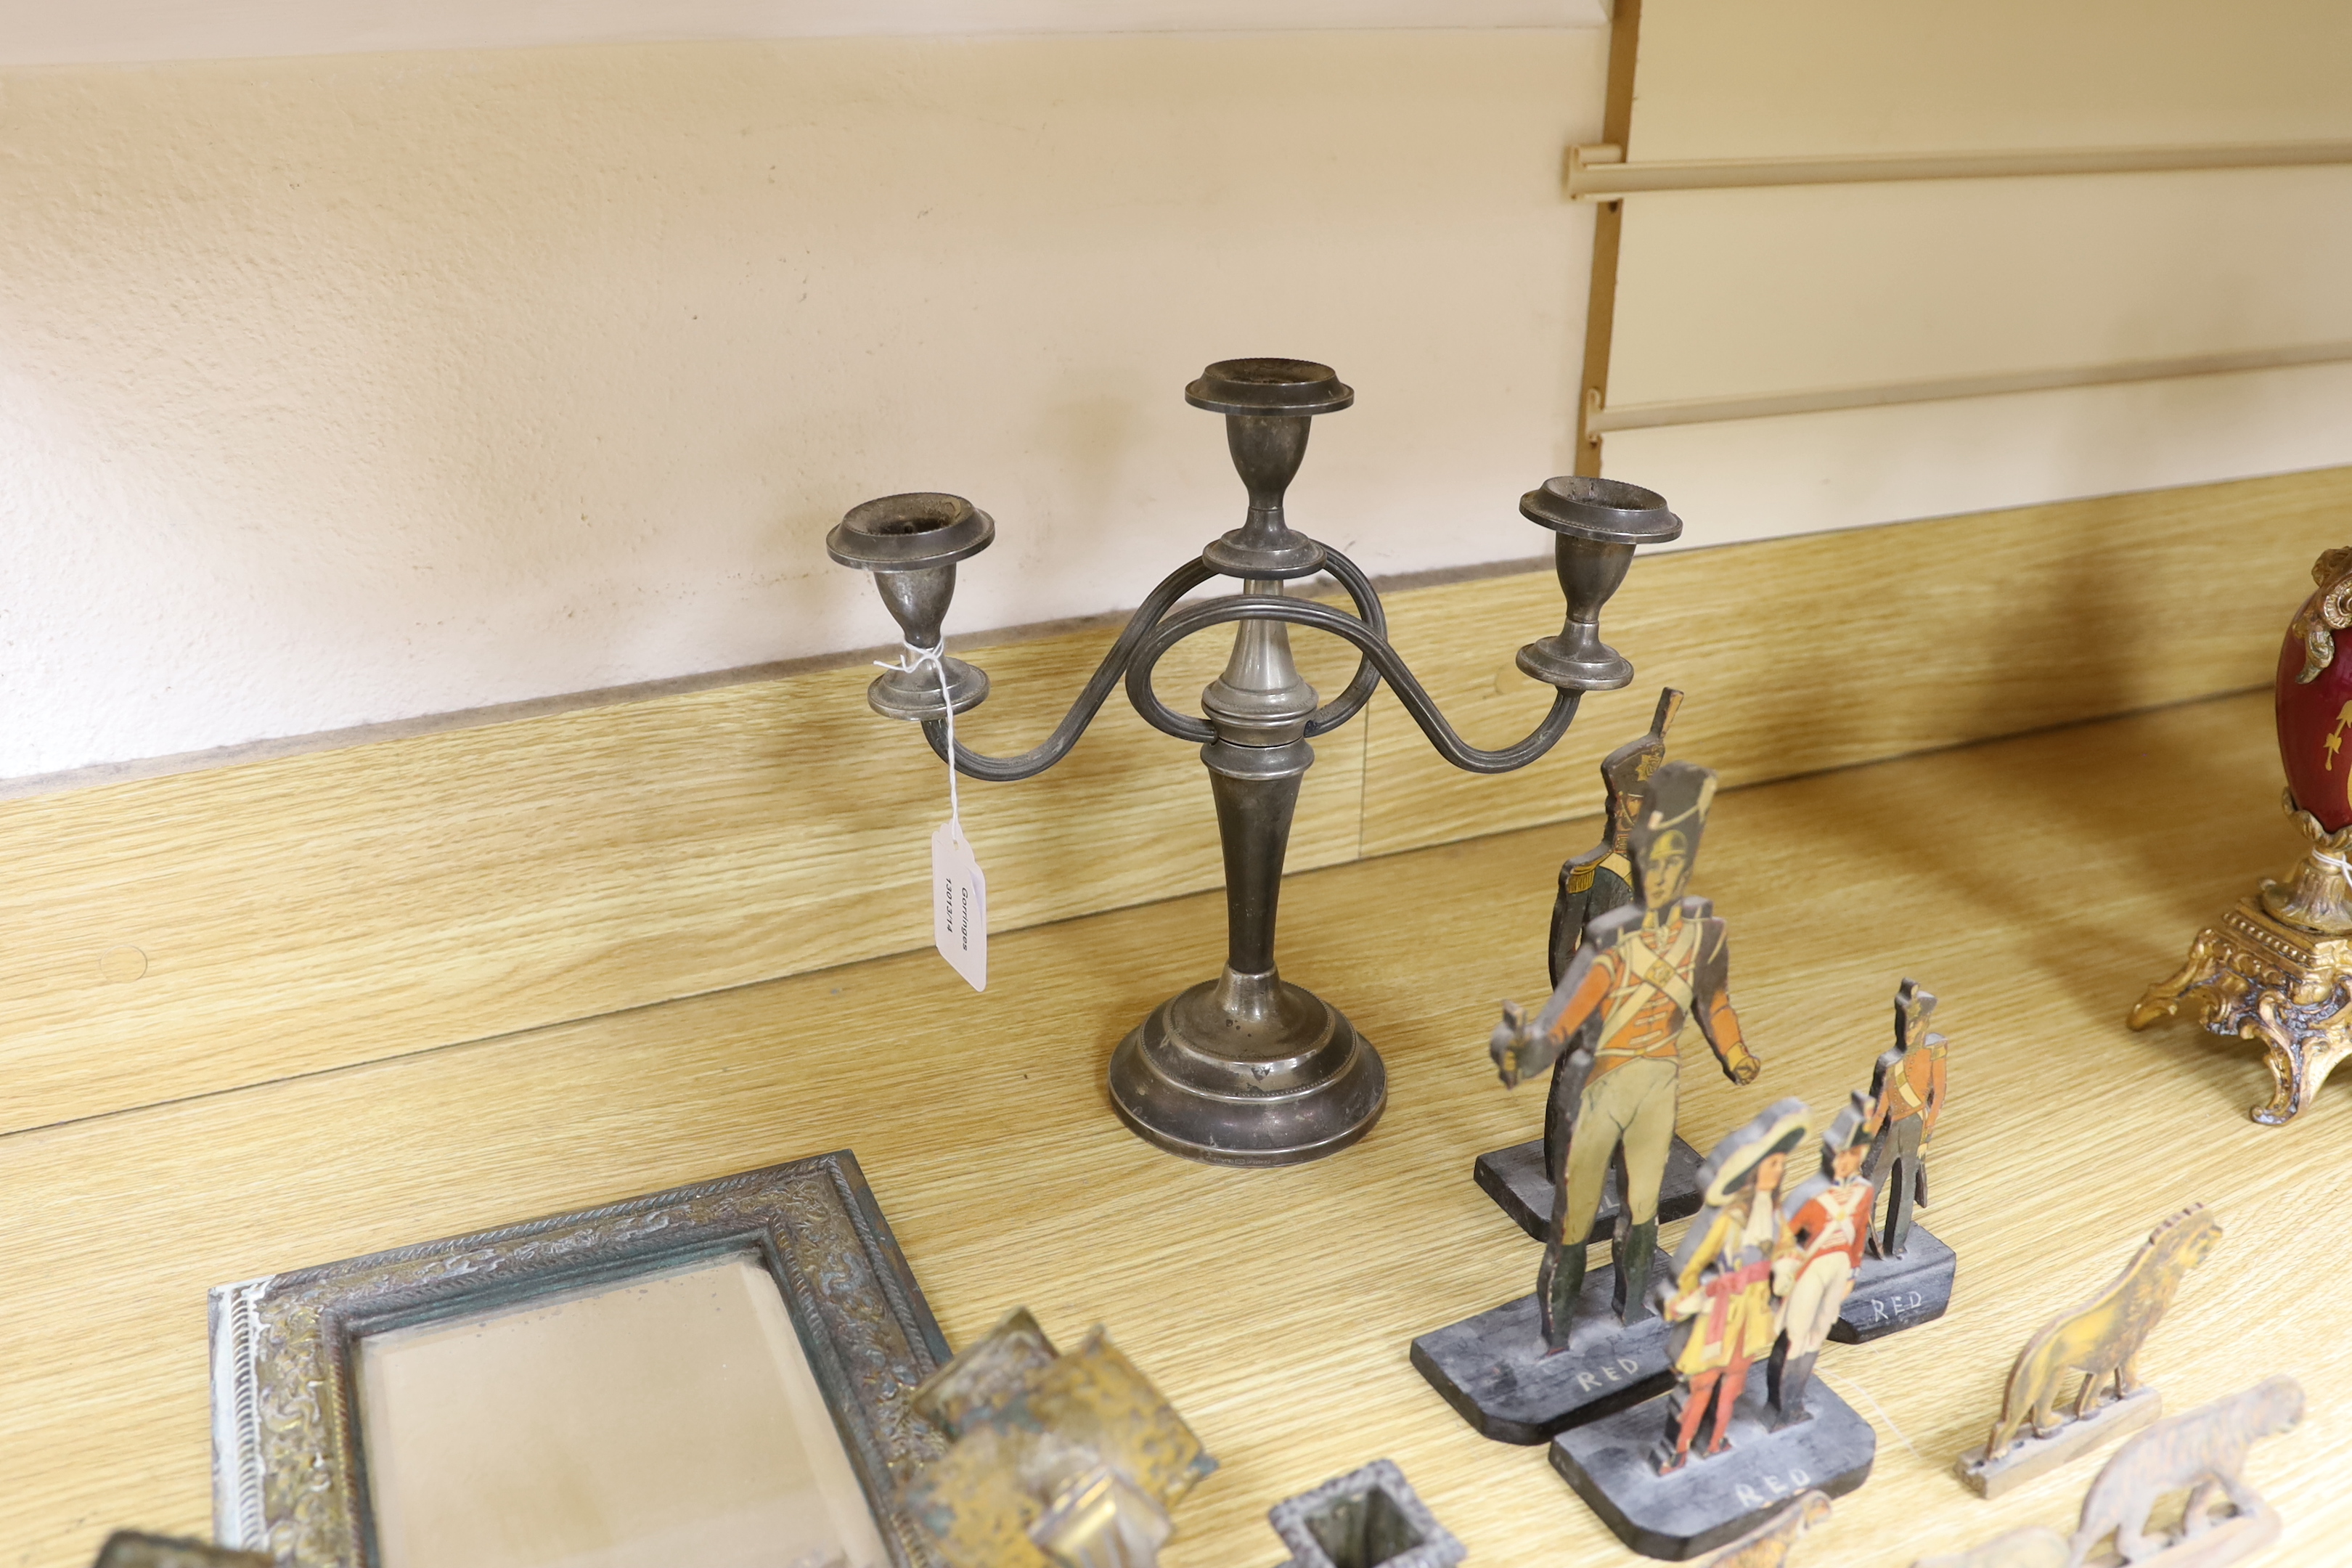 A set of three Victorian mirrored candle sconces together with various other items including a telescope